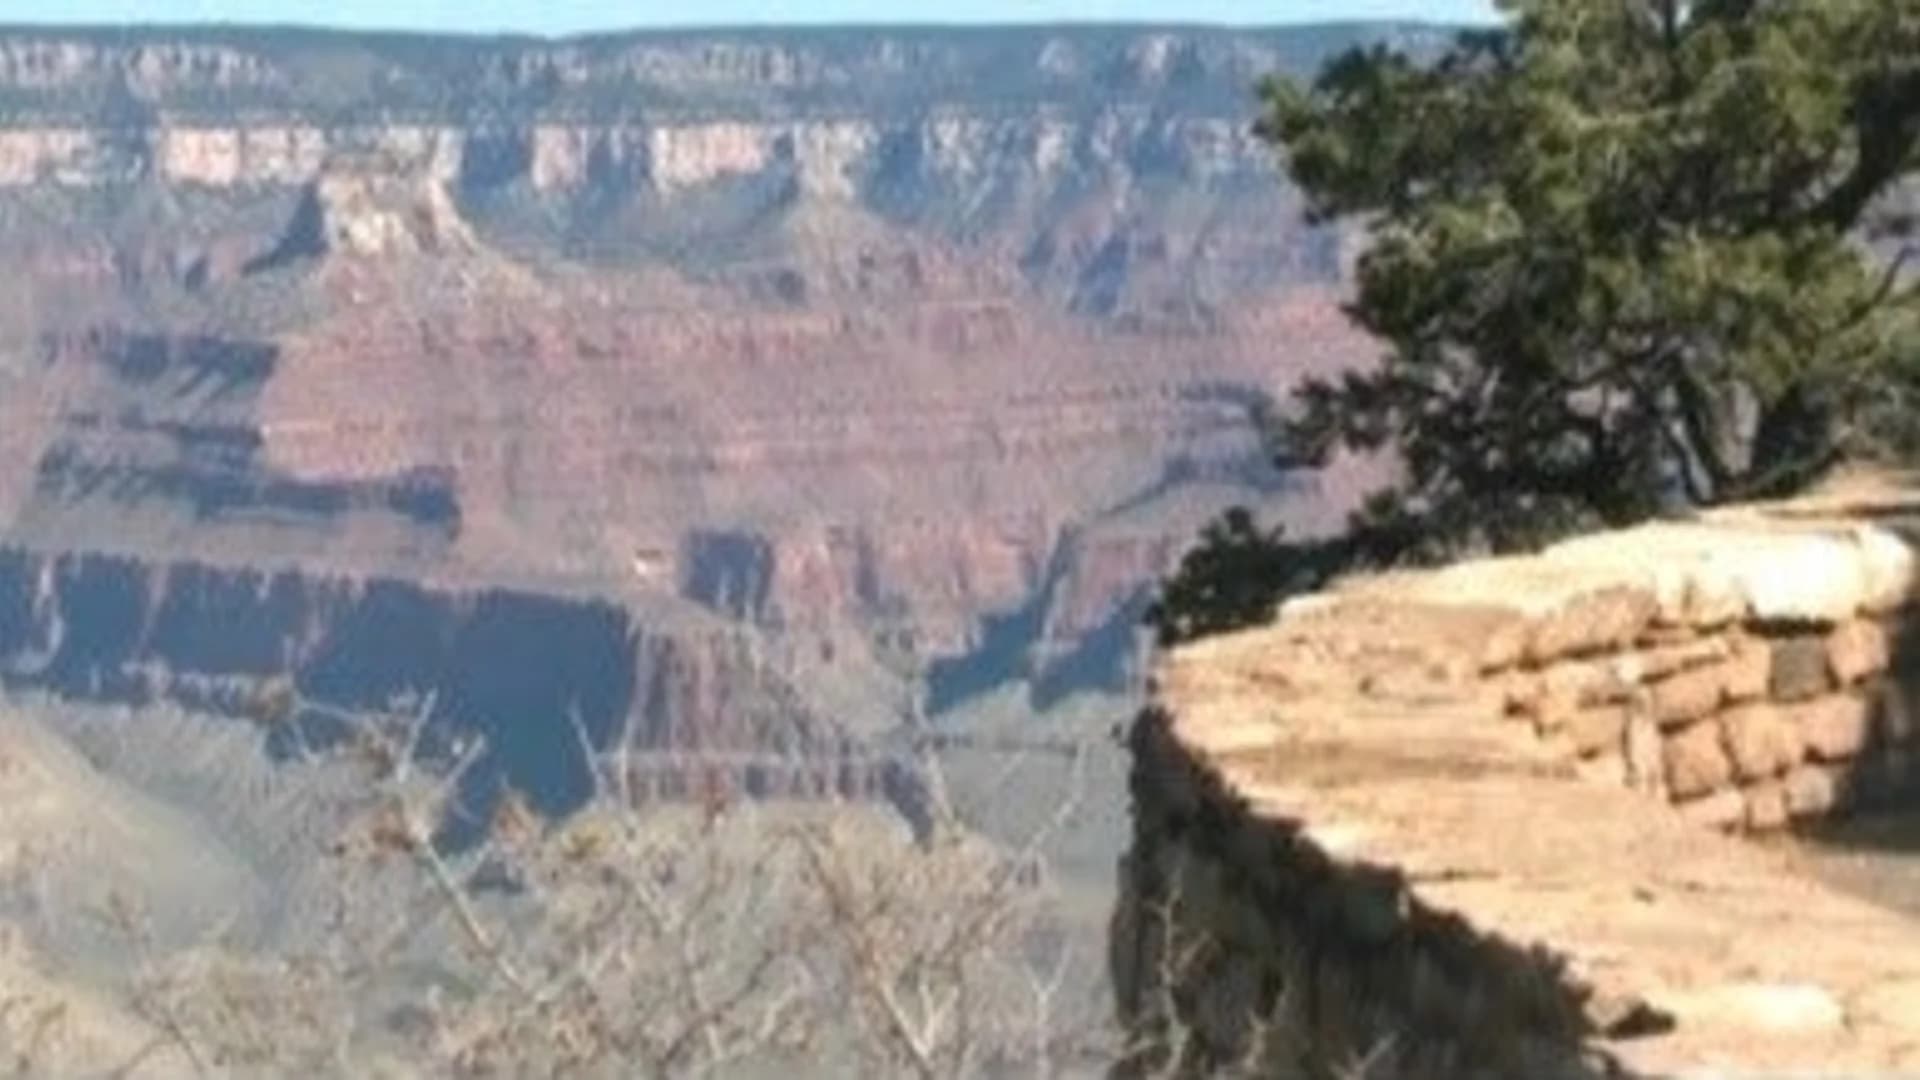 Authorities: Visitor dies after falling from edge of Grand Canyon